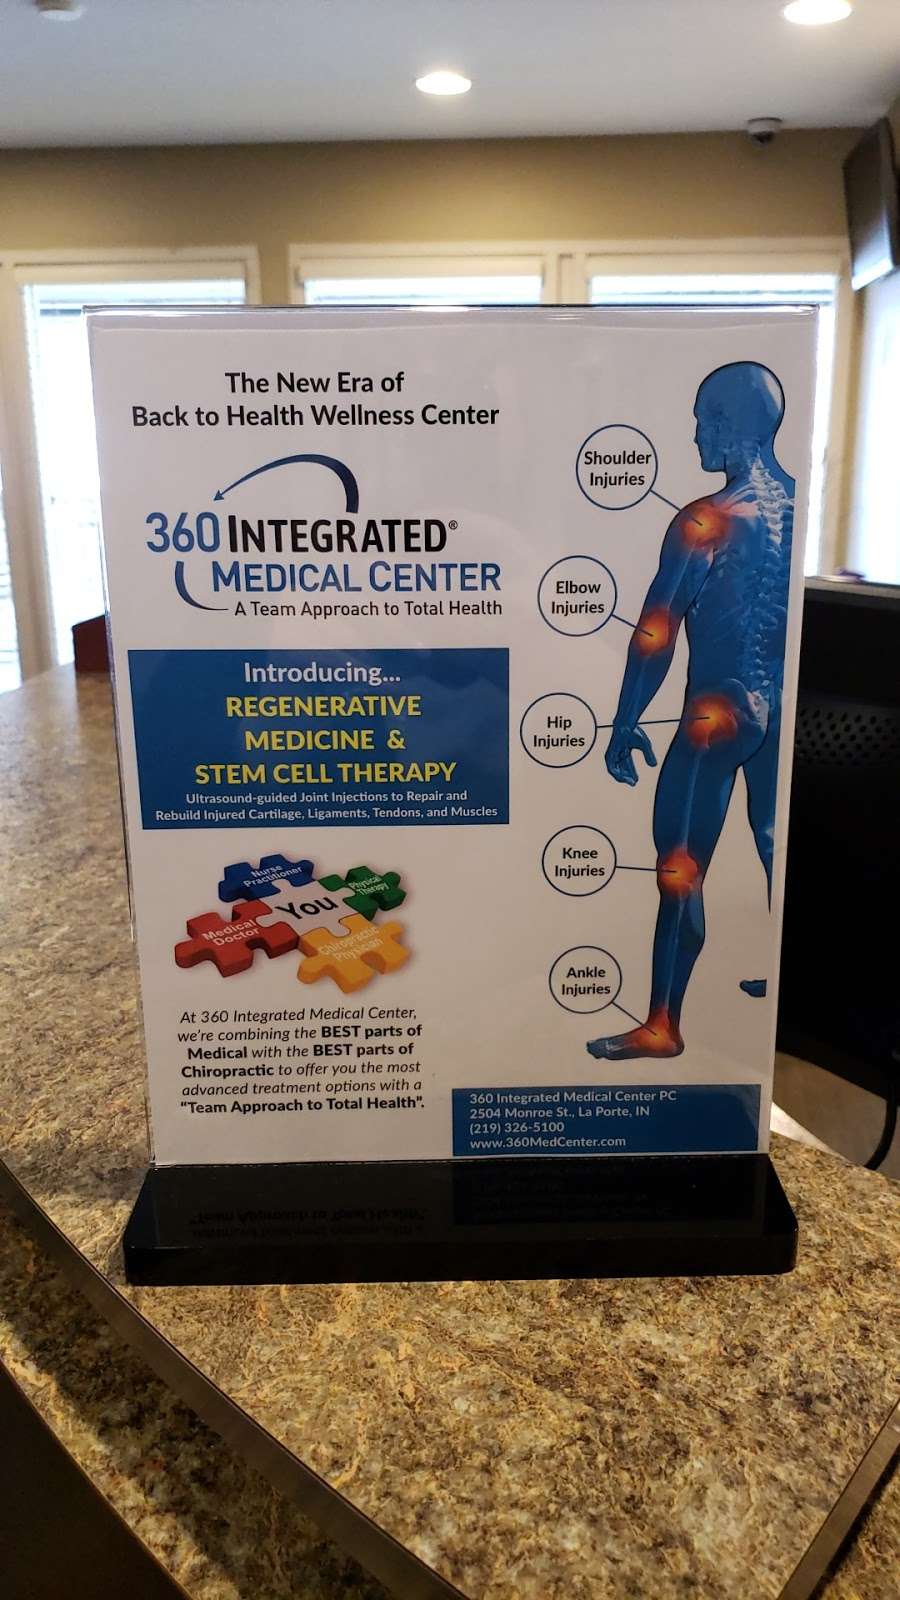 360 Integrated Medical Center (Back to Health) | 2504 Monroe St, La Porte, IN 46350, USA | Phone: (219) 326-5100